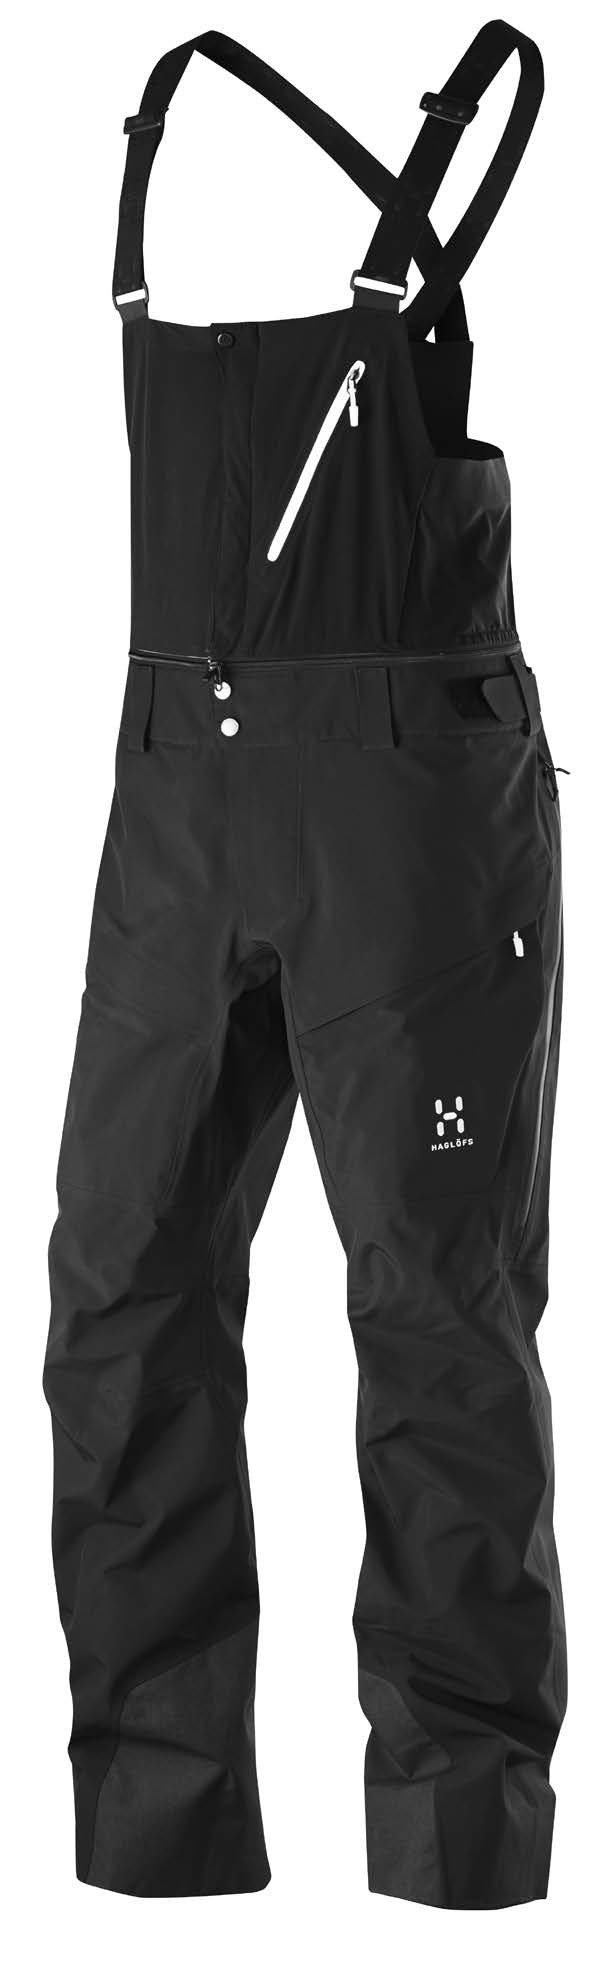 FALL/WINTER 2015 VASSI BIB MEN Vassi Bib is a pant for the dedicated off-piste skier. The durable backer is made from wind- and waterproof C-KNIT over eco-friendly Keprotec.